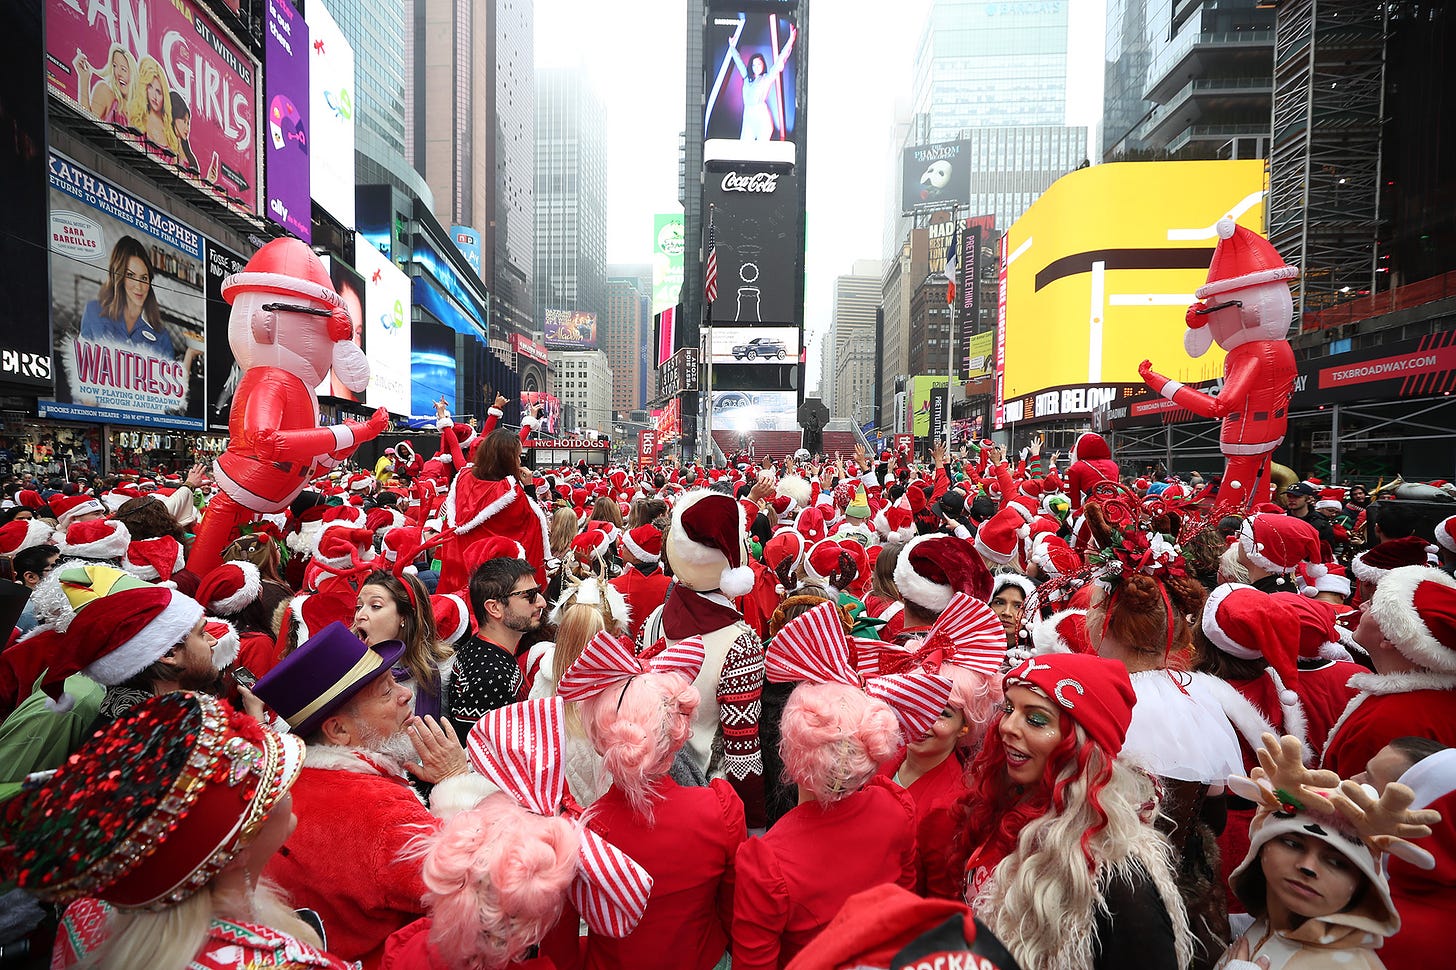 SantaCon is coming back to NYC on Dec. 11 after pandemic